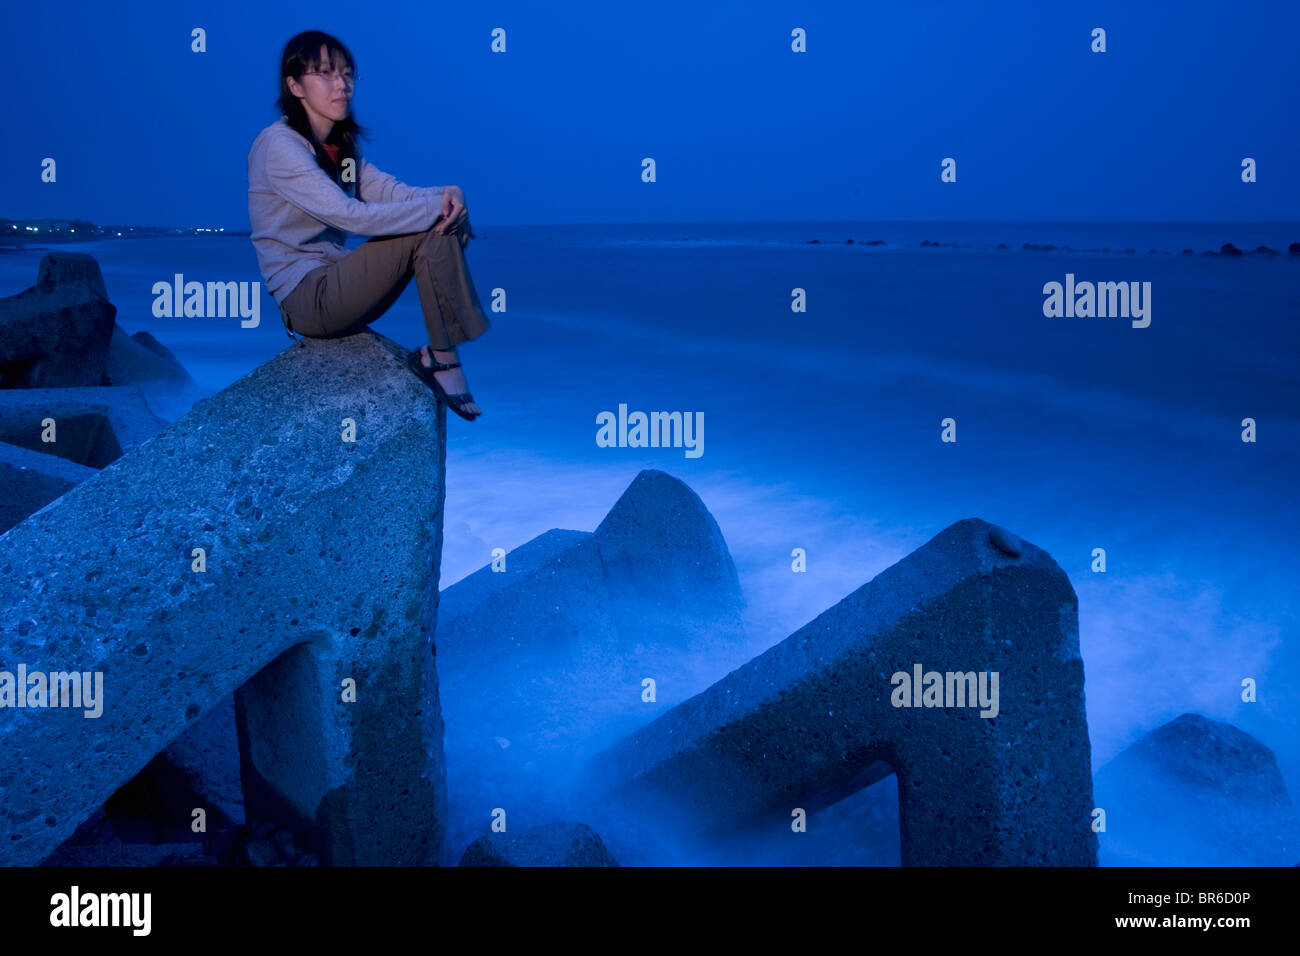 Earthquake scientist sits by the ocean at dusk. Stock Photo